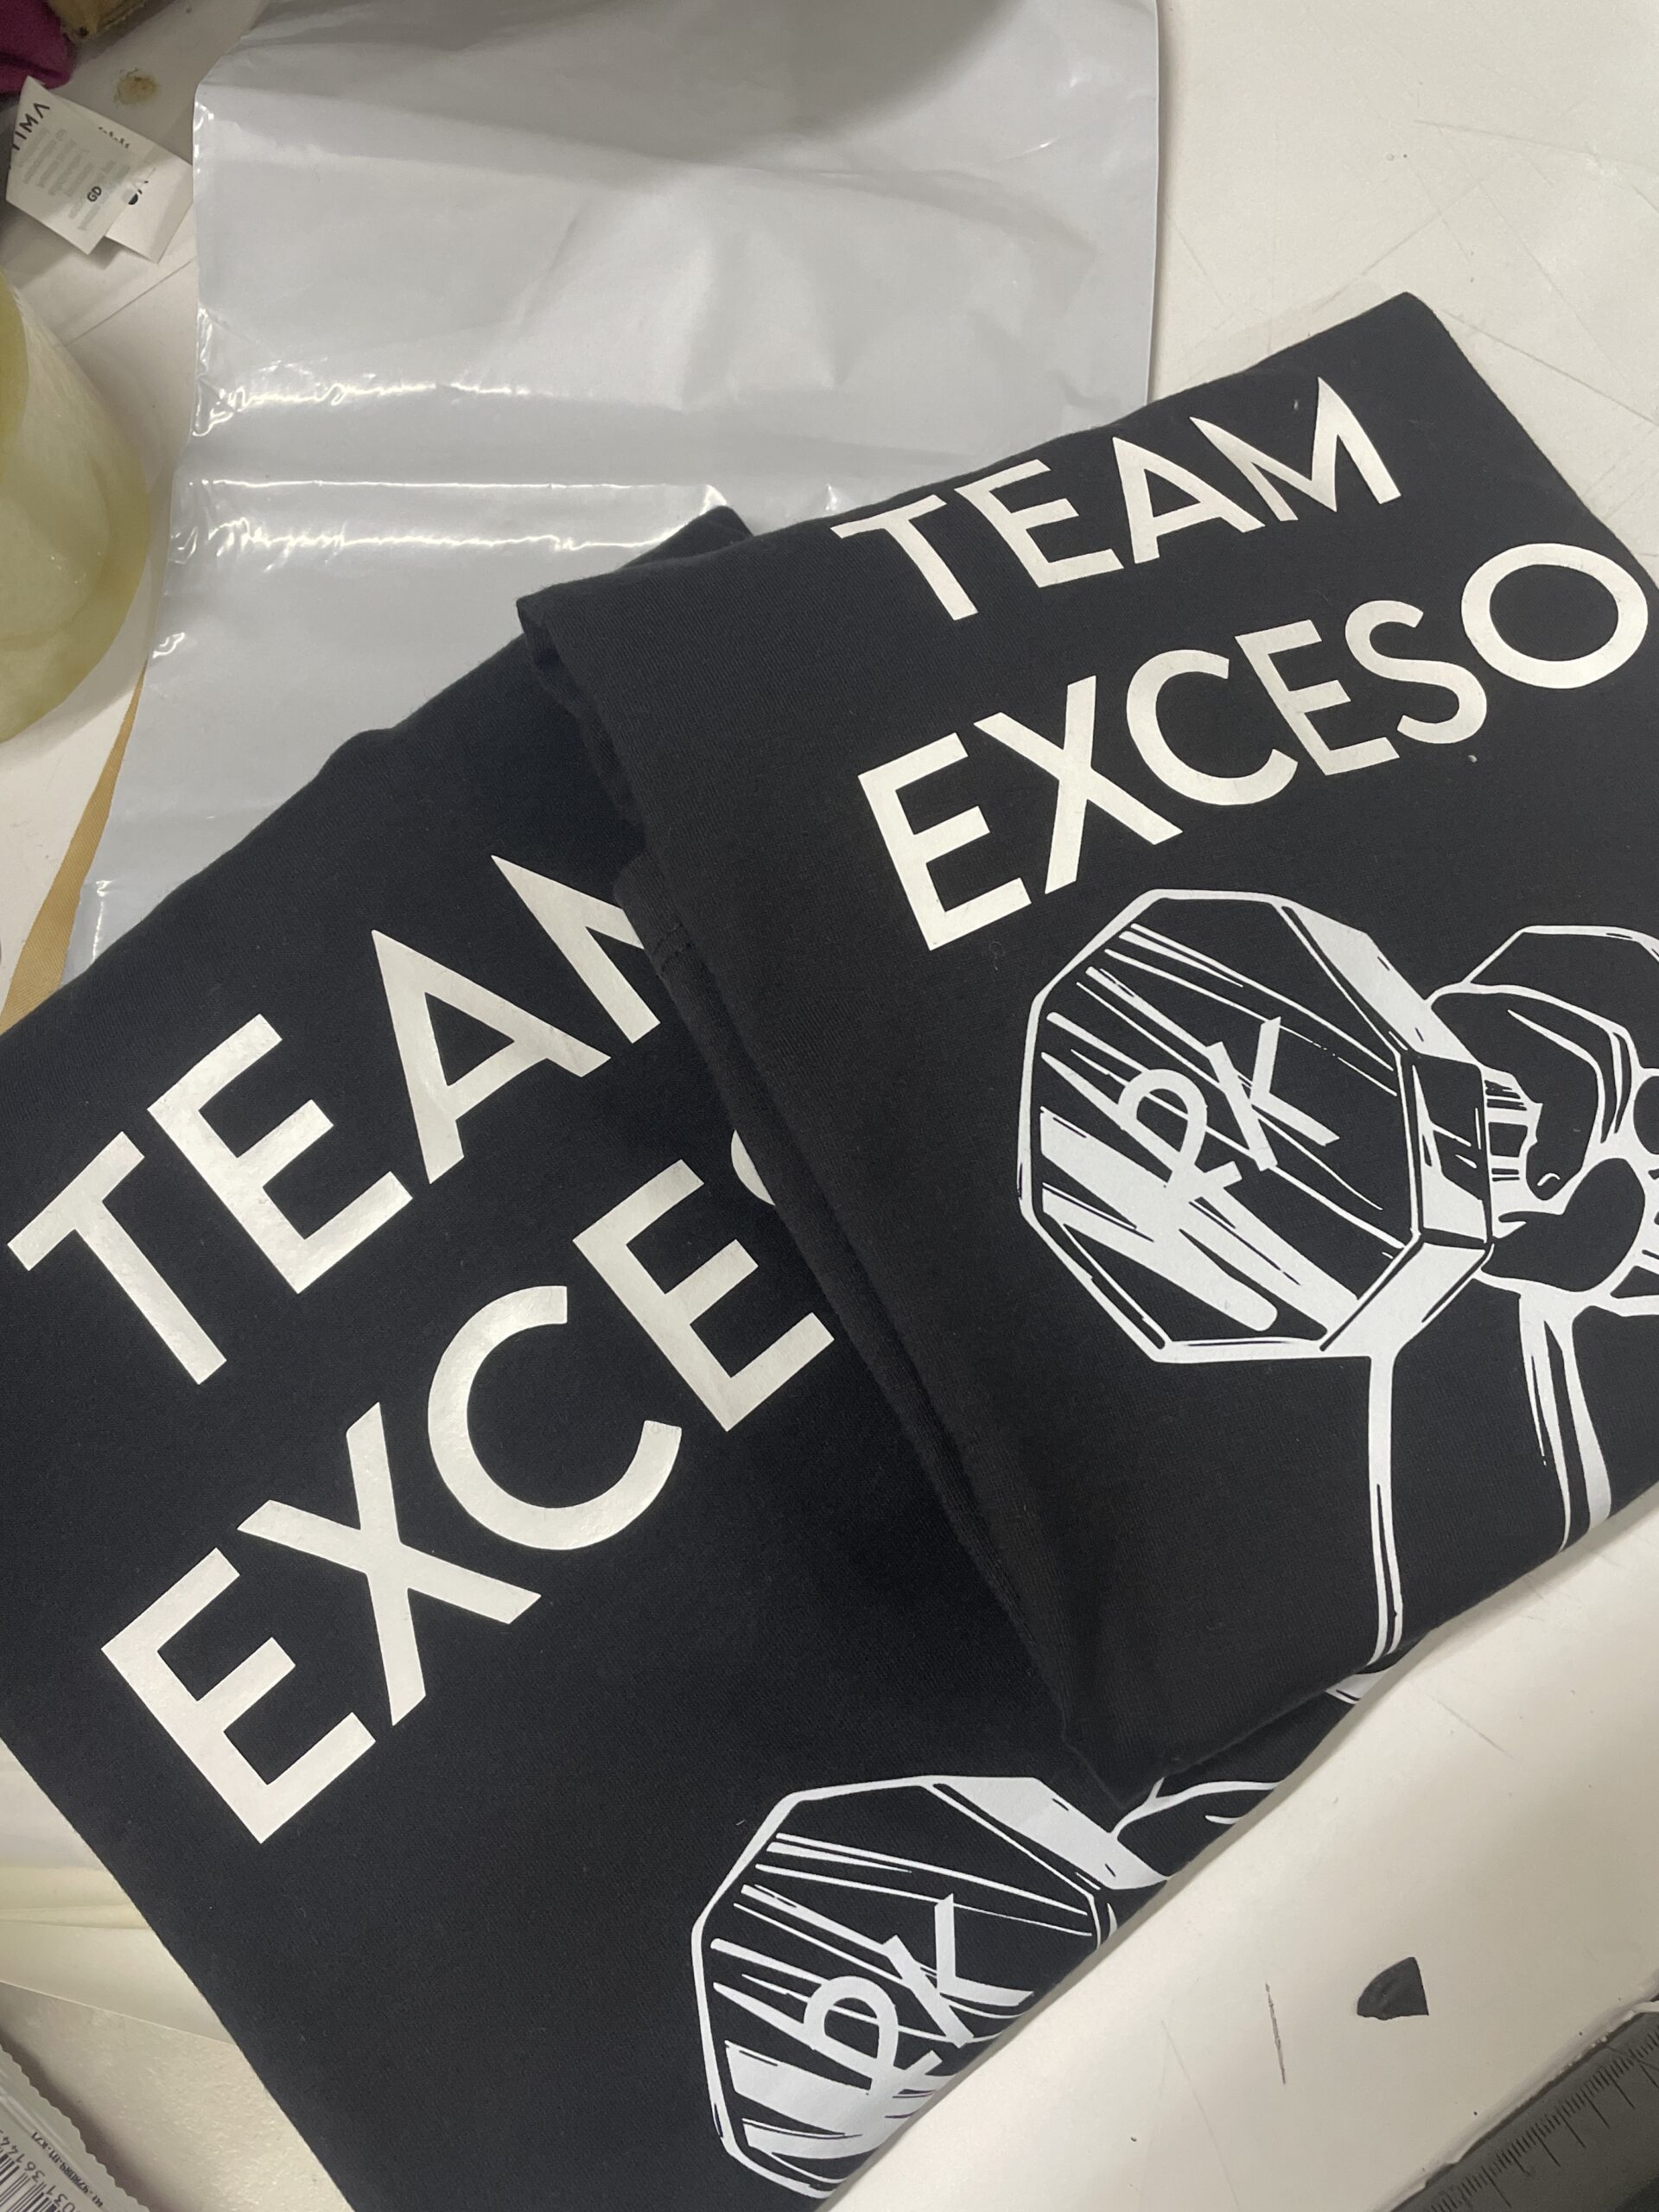 Team Exceso photo review